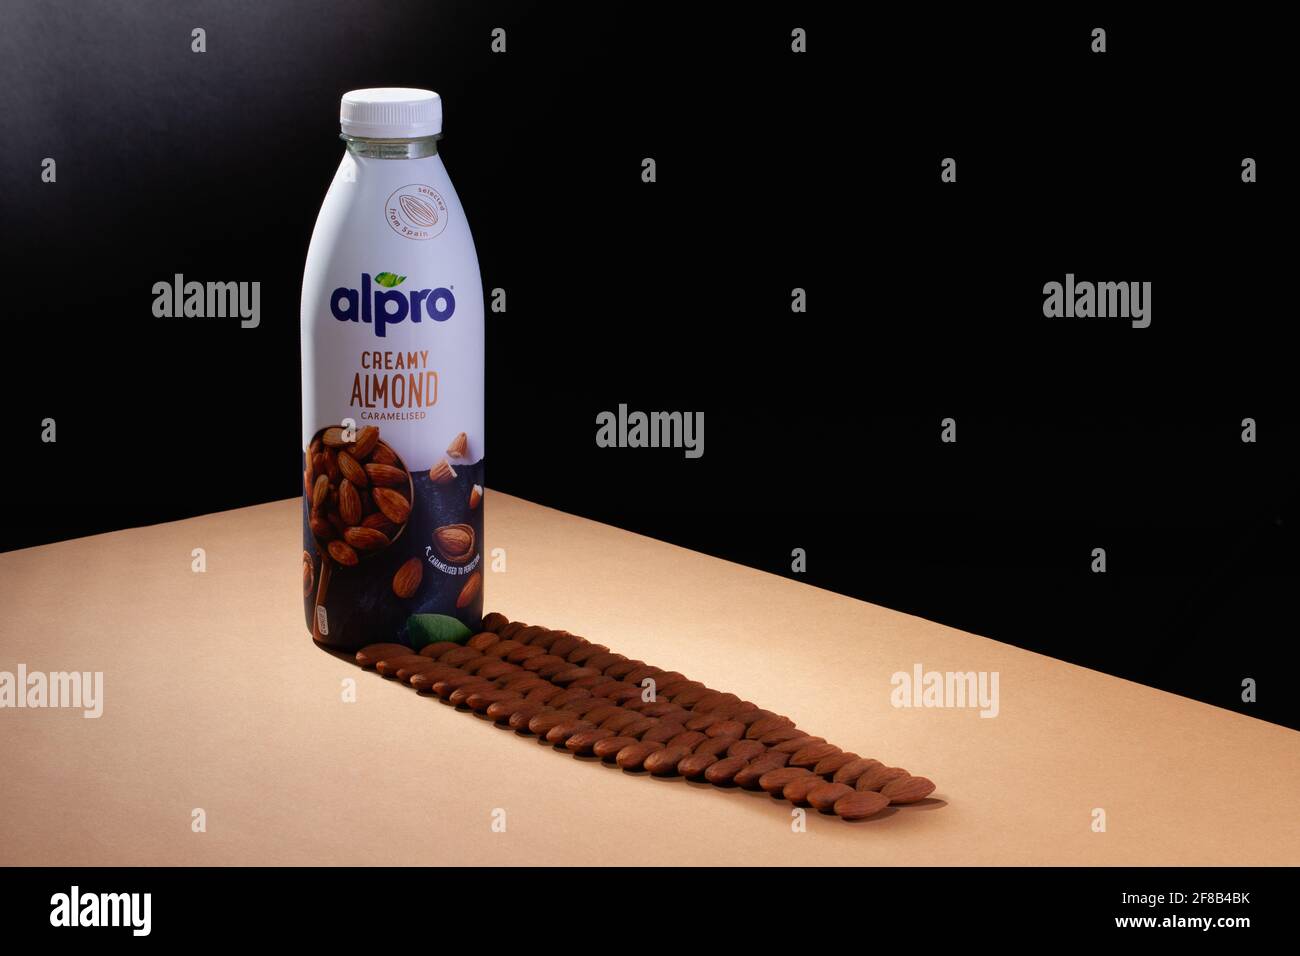 Prague,Czech Republic on the Alamy and organic is Stock drink Alpro almonds European shadow markets that Alpro table. of March,2021: a - brown almond Photo company - 22